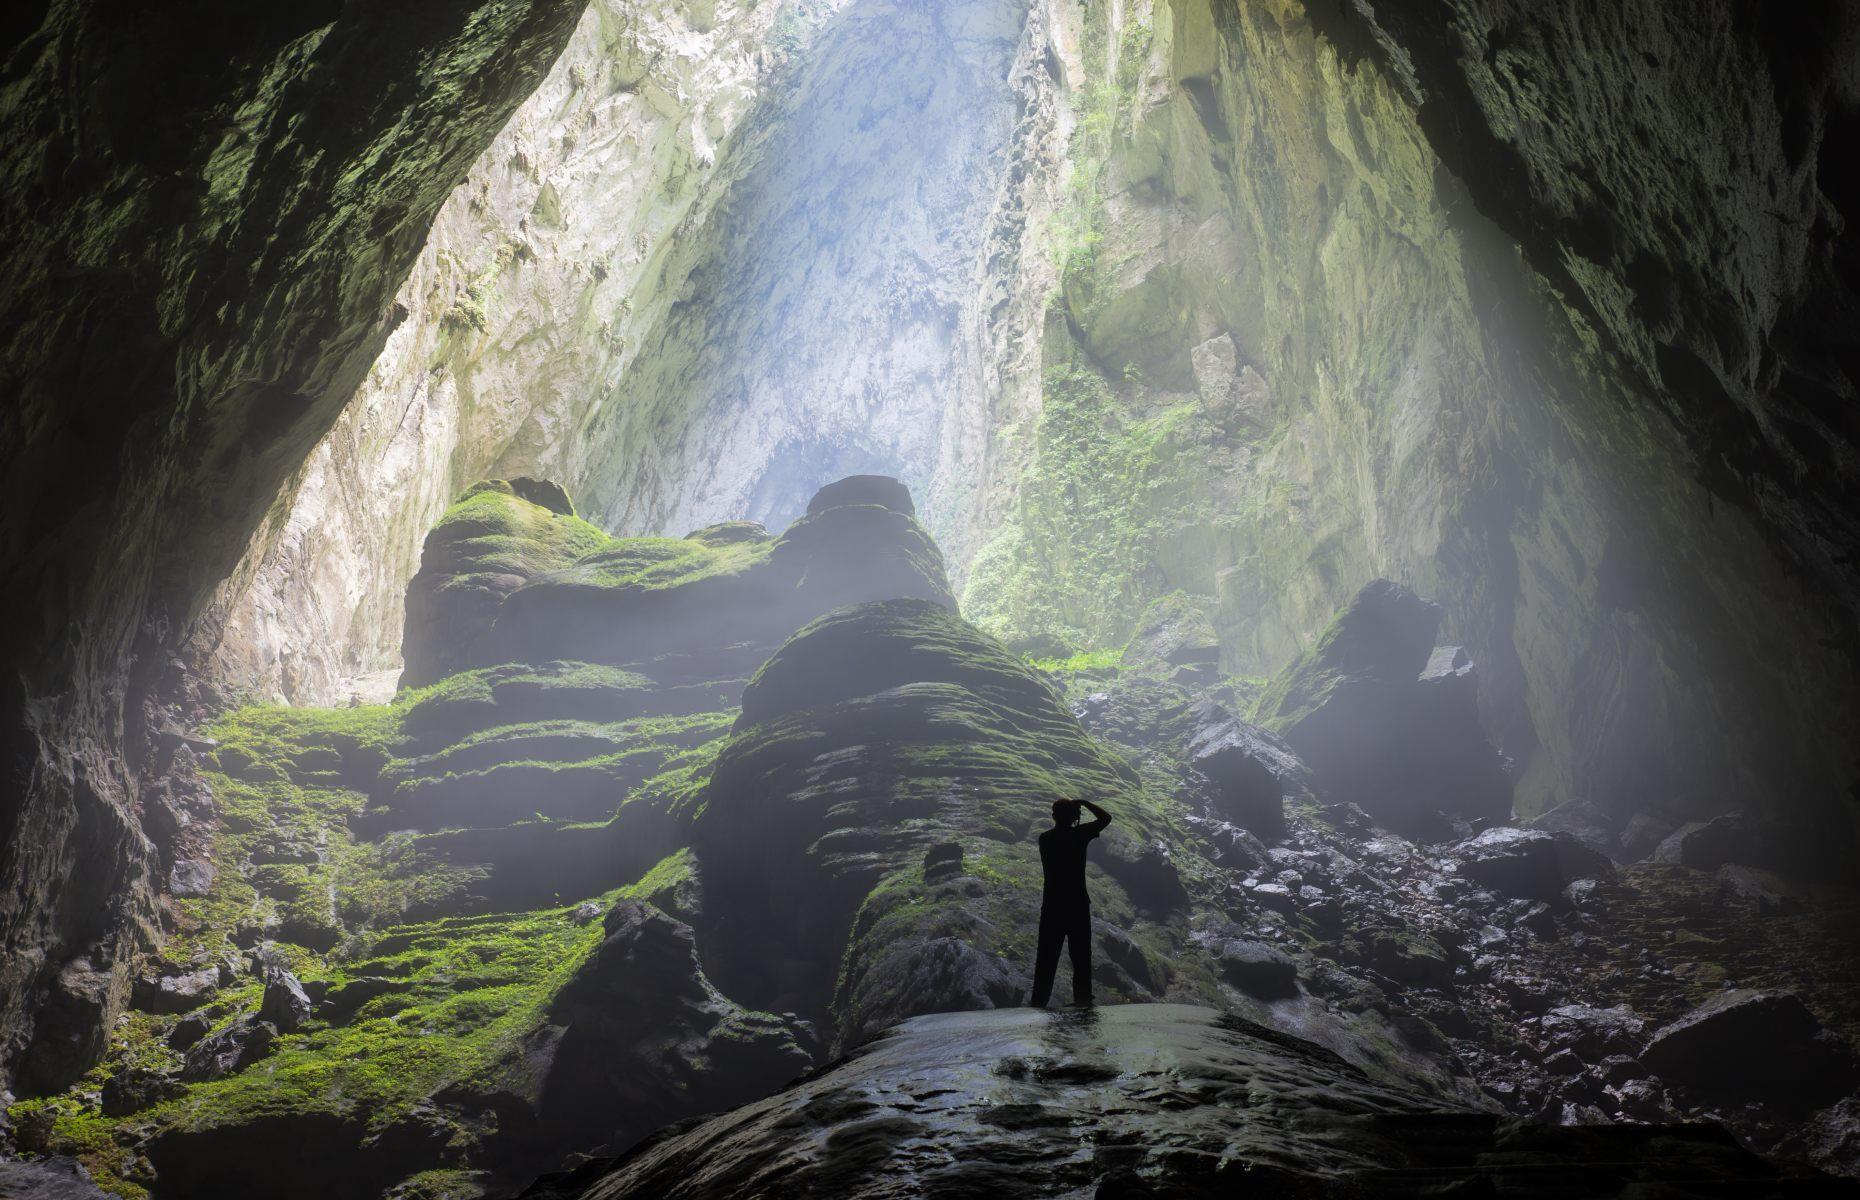 <p>The world’s largest cave, Son Doong, was only discovered and first explored in 2009. If you’re lucky enough to visit the cave in remote Phong Nha-Ke Bang National Park, you’ll find the longest stalactites in the world, limestone cave pearls and an underground rainforest. You can visit the cave on a <a href="https://oxalisadventure.com/cave/son-doong-cave/">four-day expedition</a> from February to August, but tours must be booked well in advance. </p>